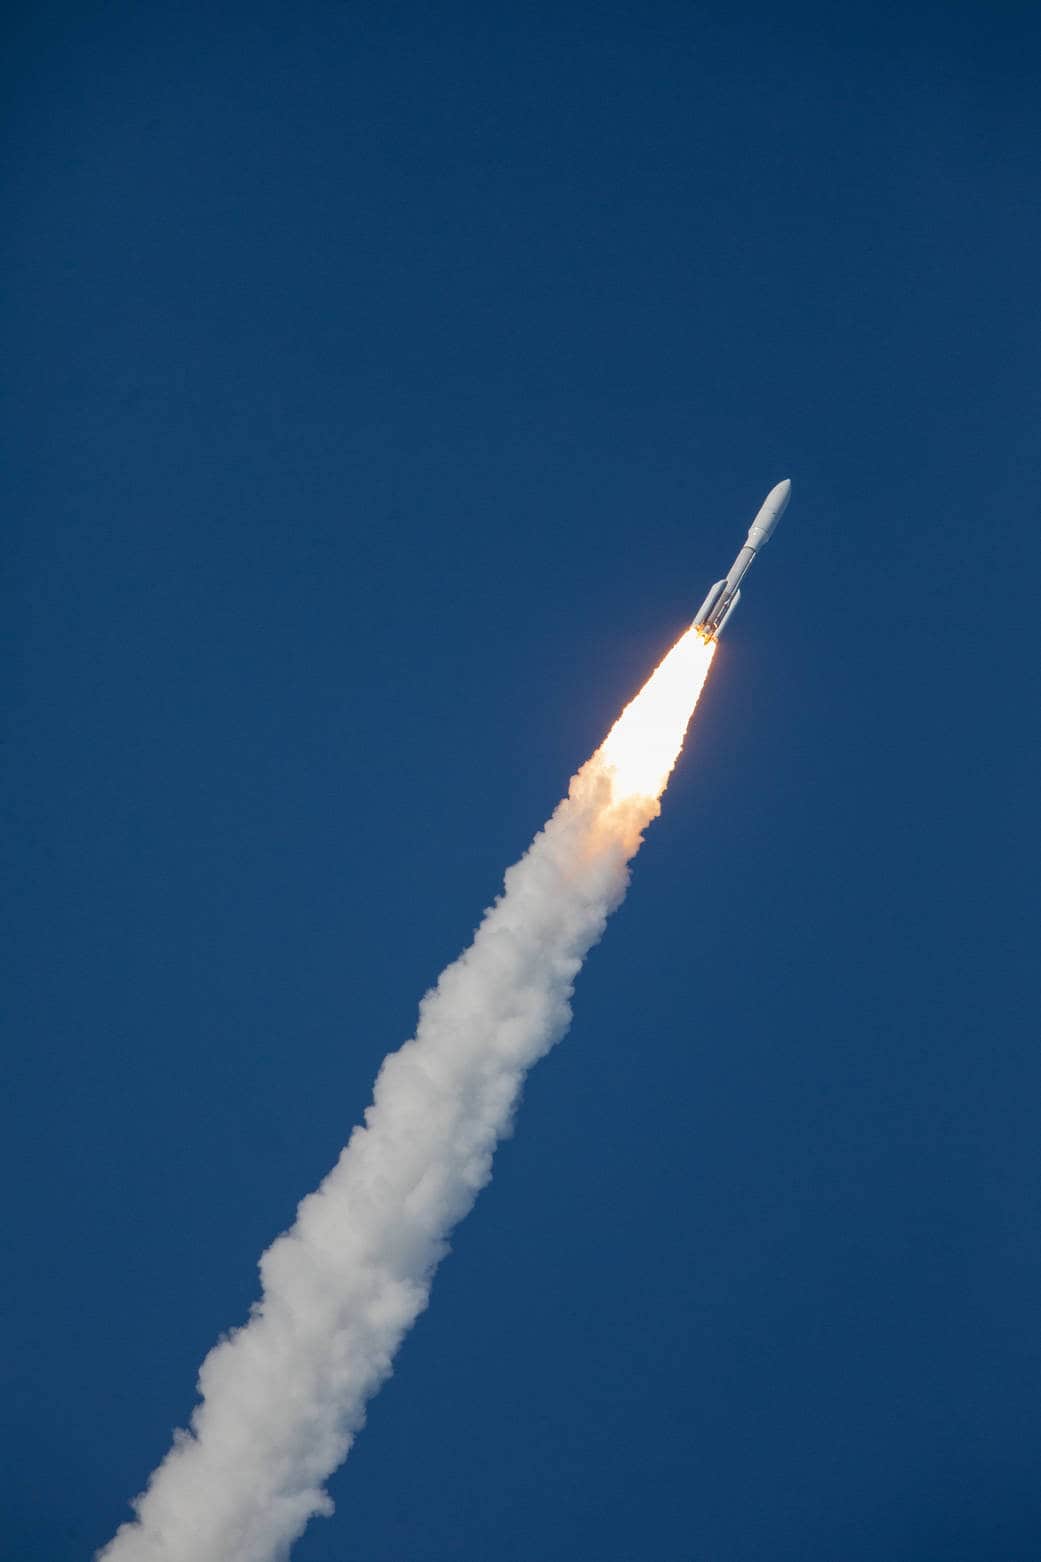 launch of GOES-T meteorological satellite — March 1, 2022 Cape Canaveral Florida